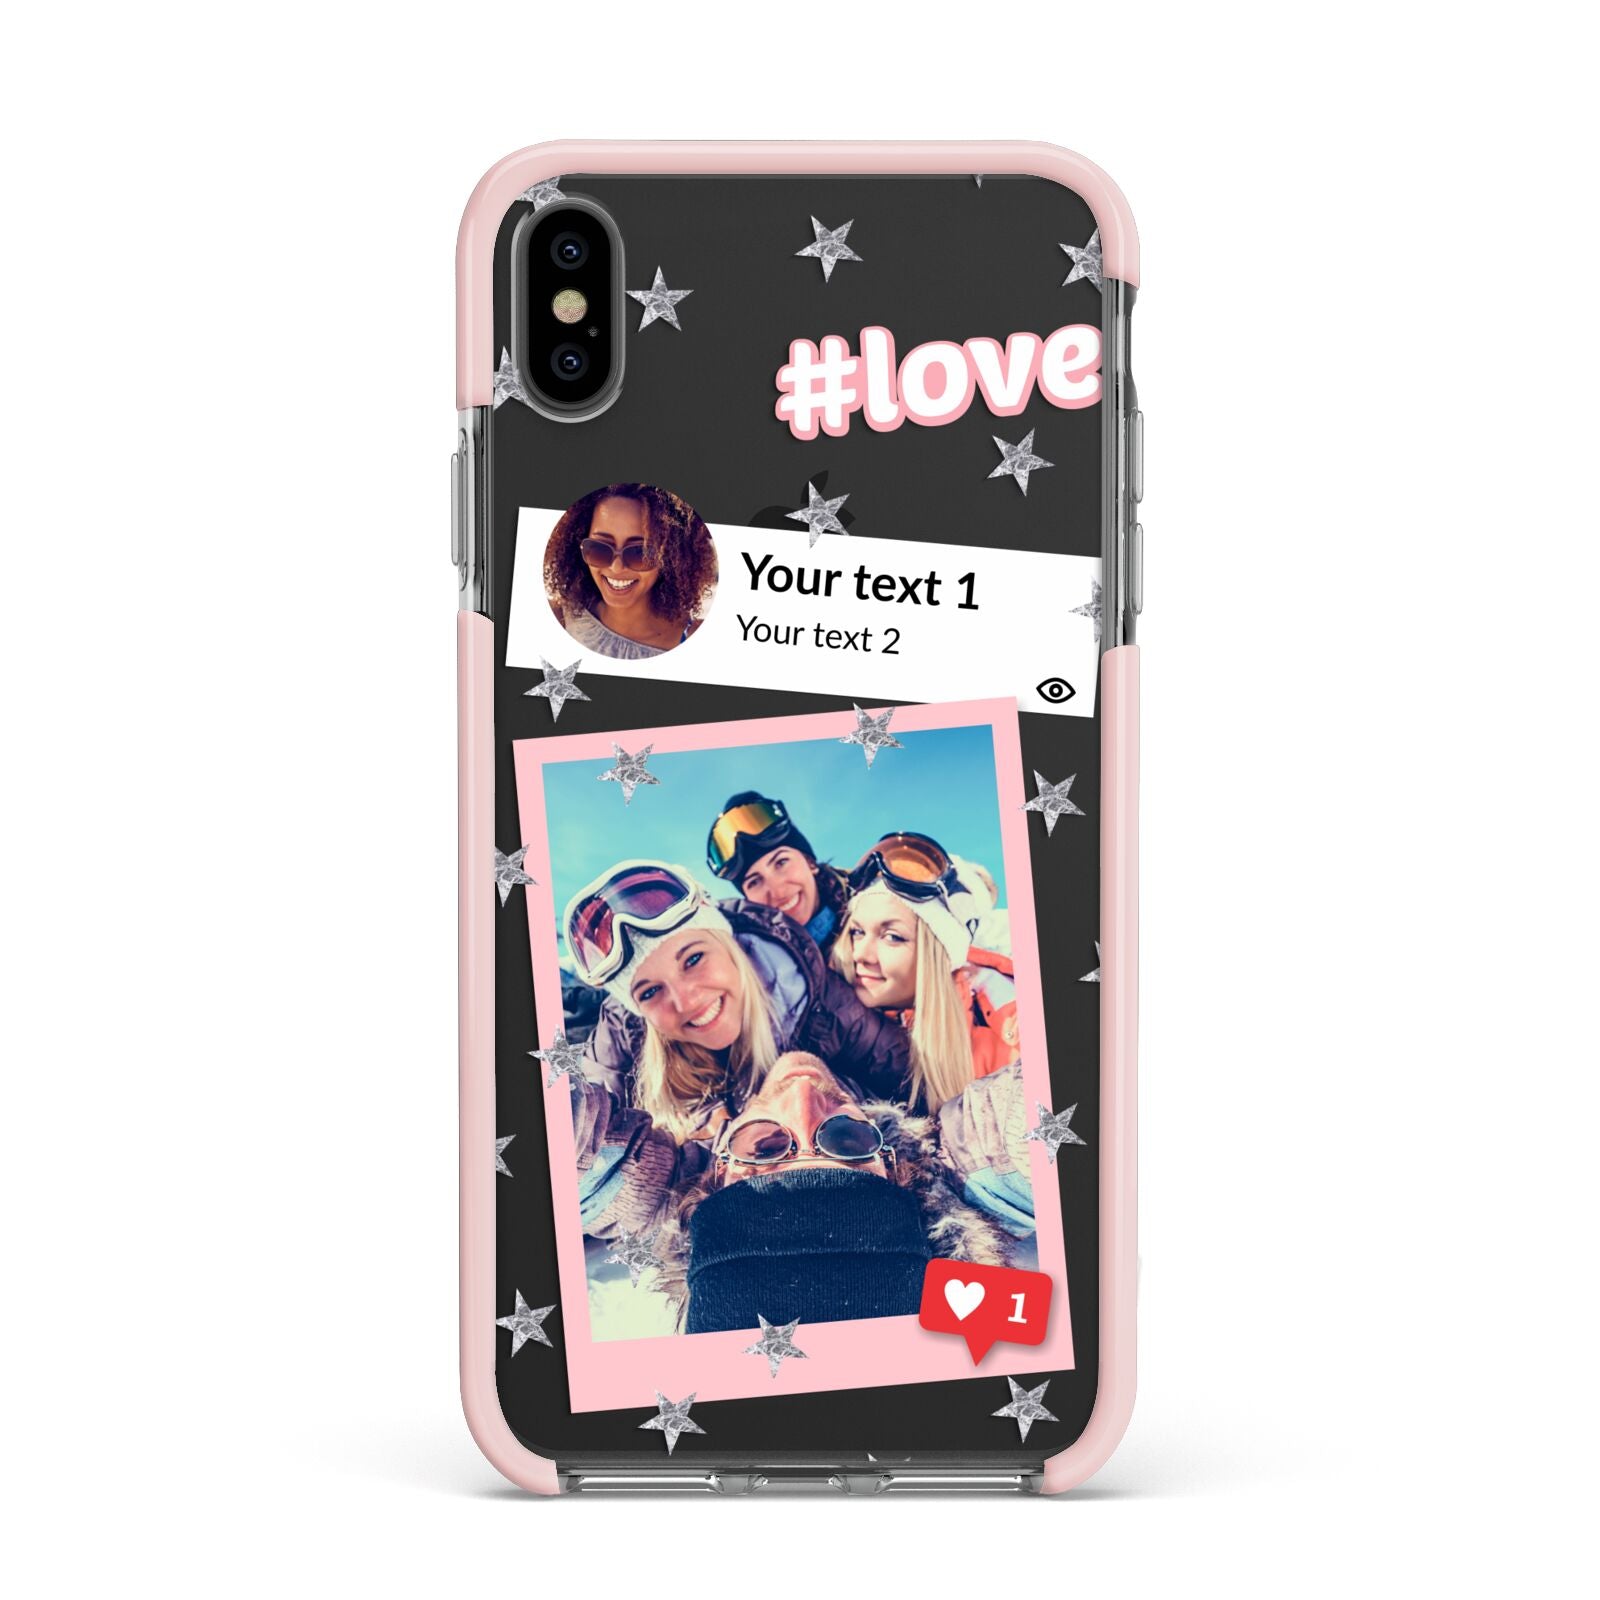 Starry Social Media Photo Montage Upload with Text Apple iPhone Xs Max Impact Case Pink Edge on Black Phone